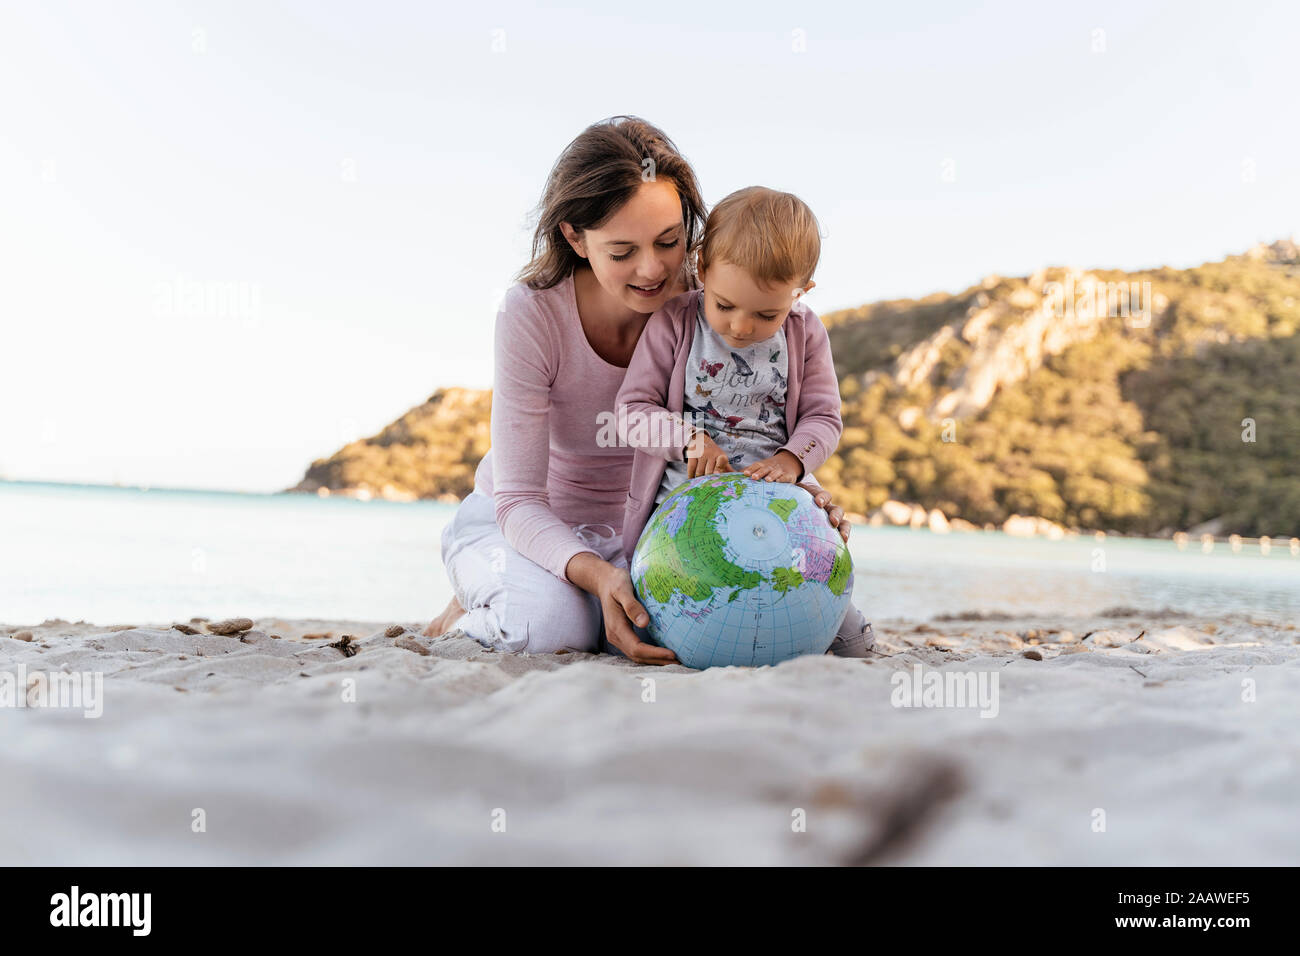 Mother and little daughter looking together at Earth beach ball Stock Photo